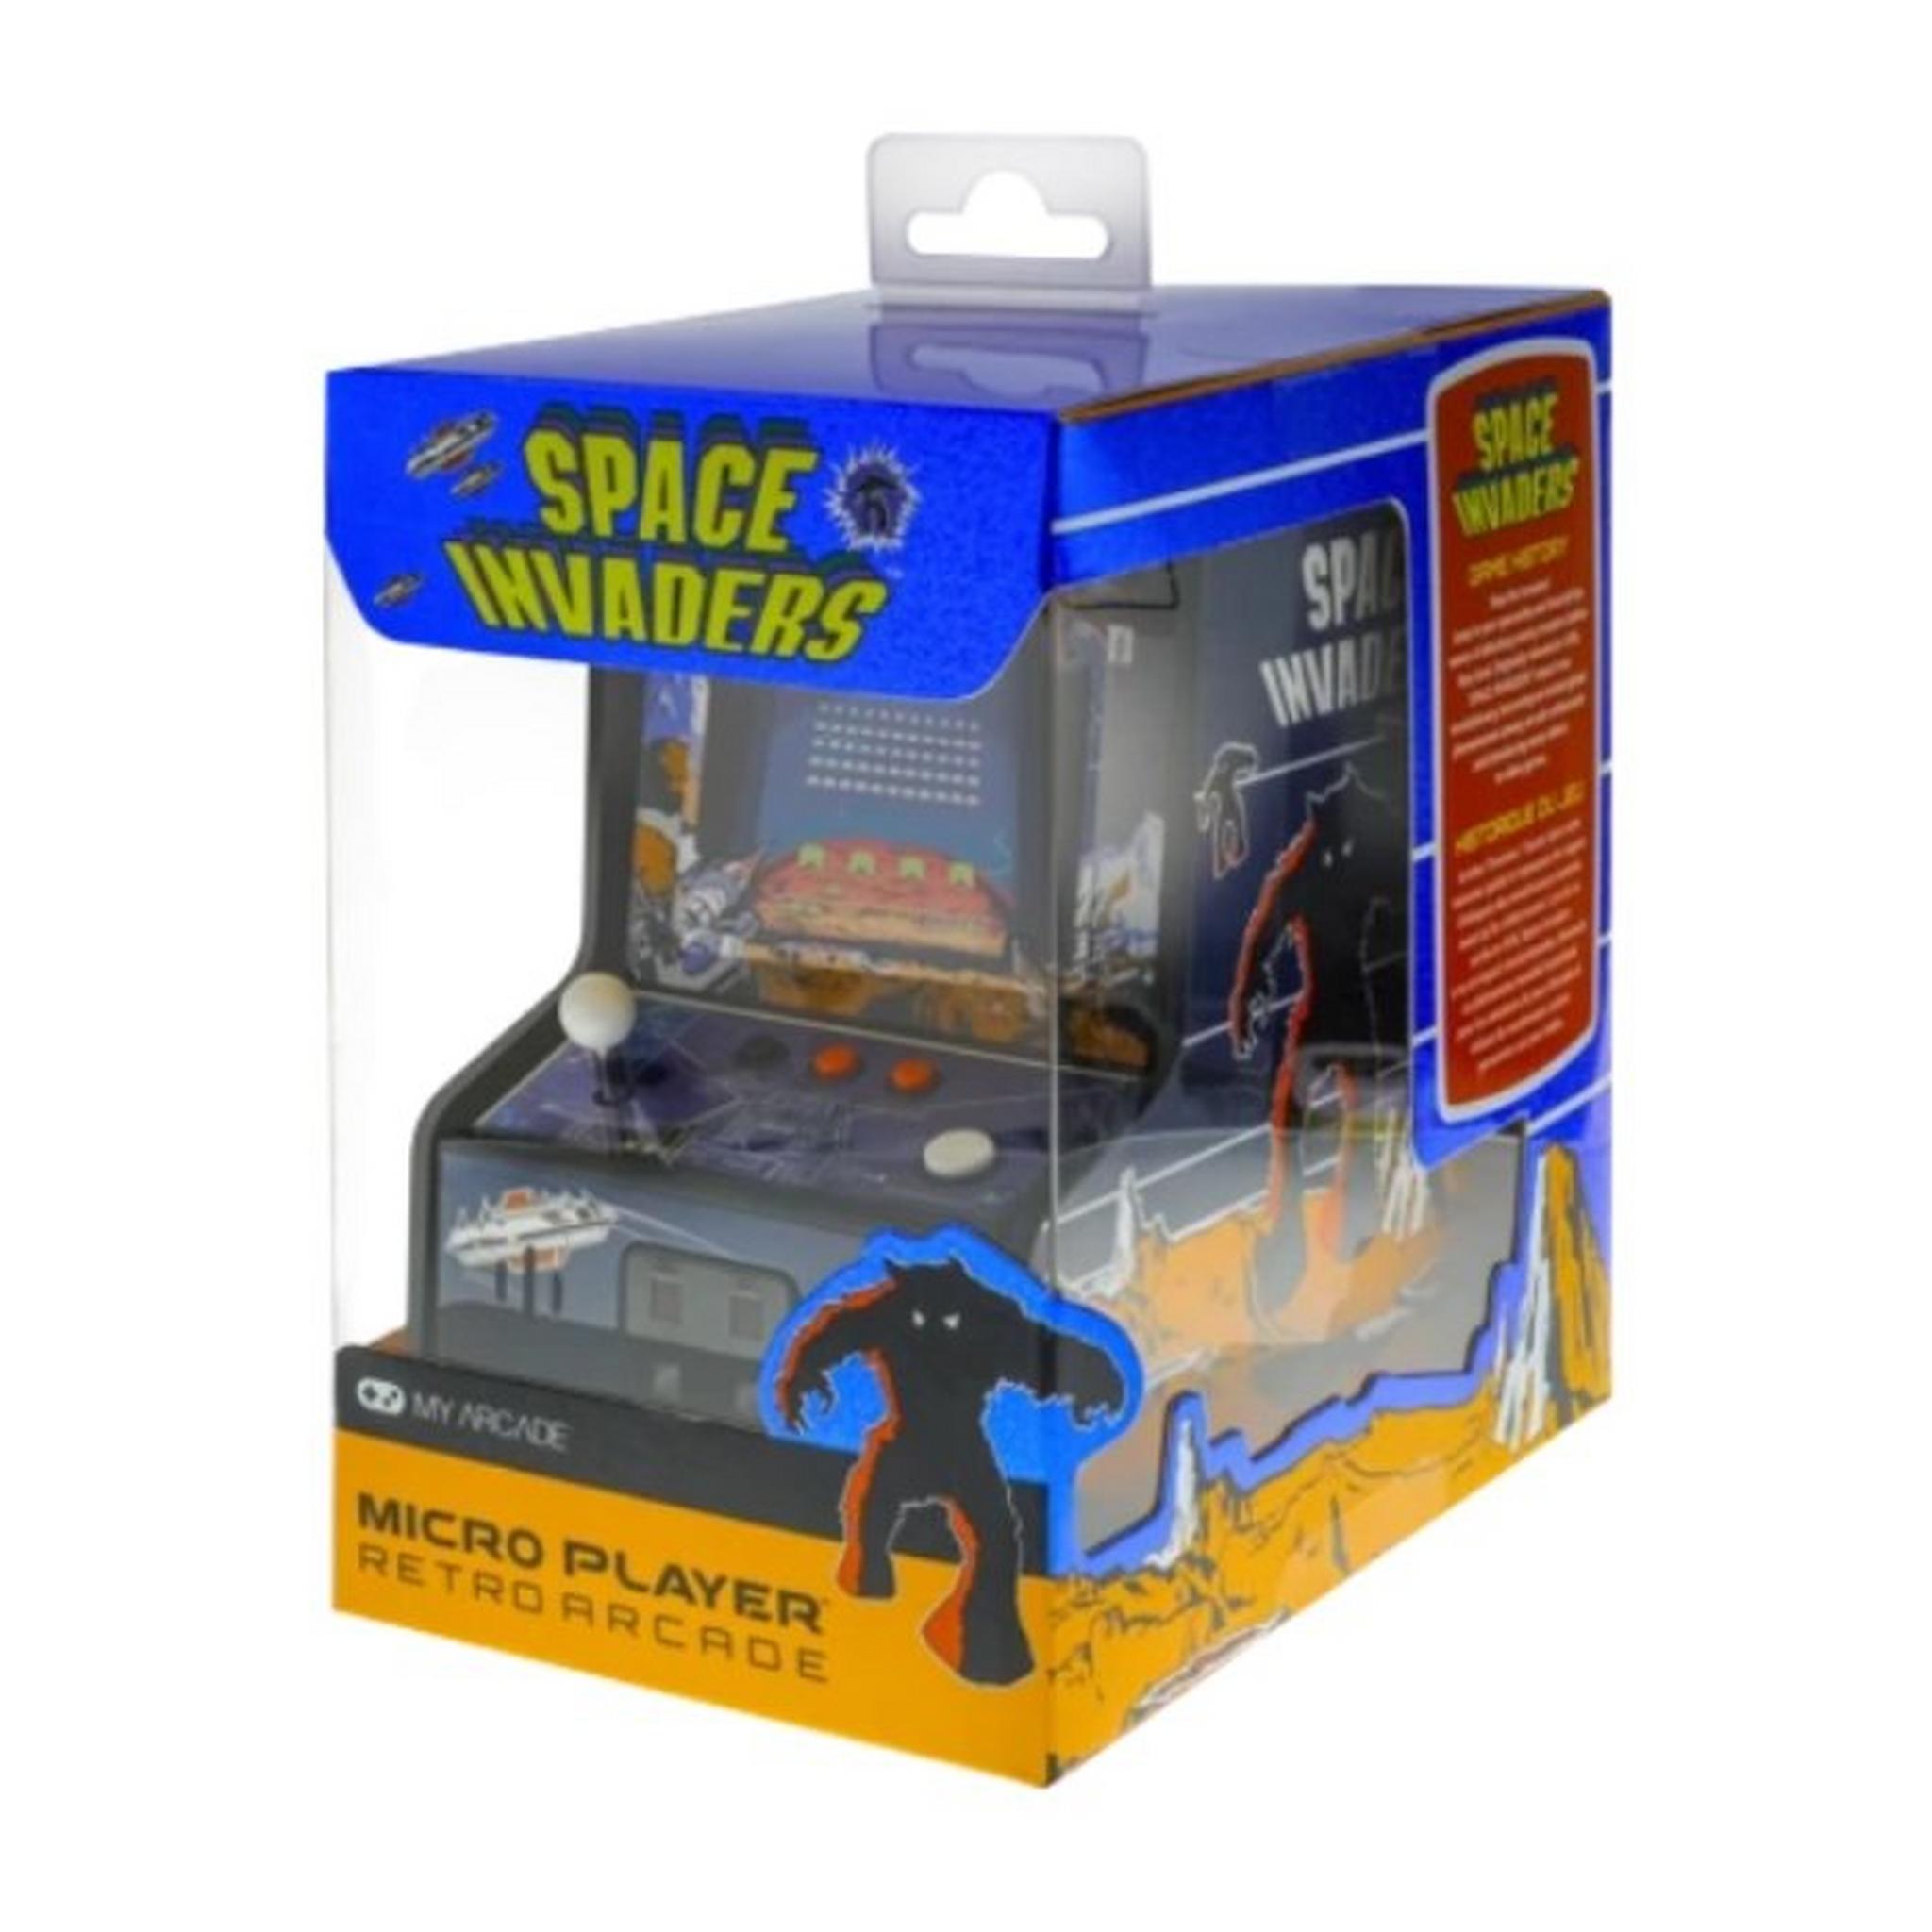 My Arcade Space Invaders Micro player Collectible Miniature Retro Arcade